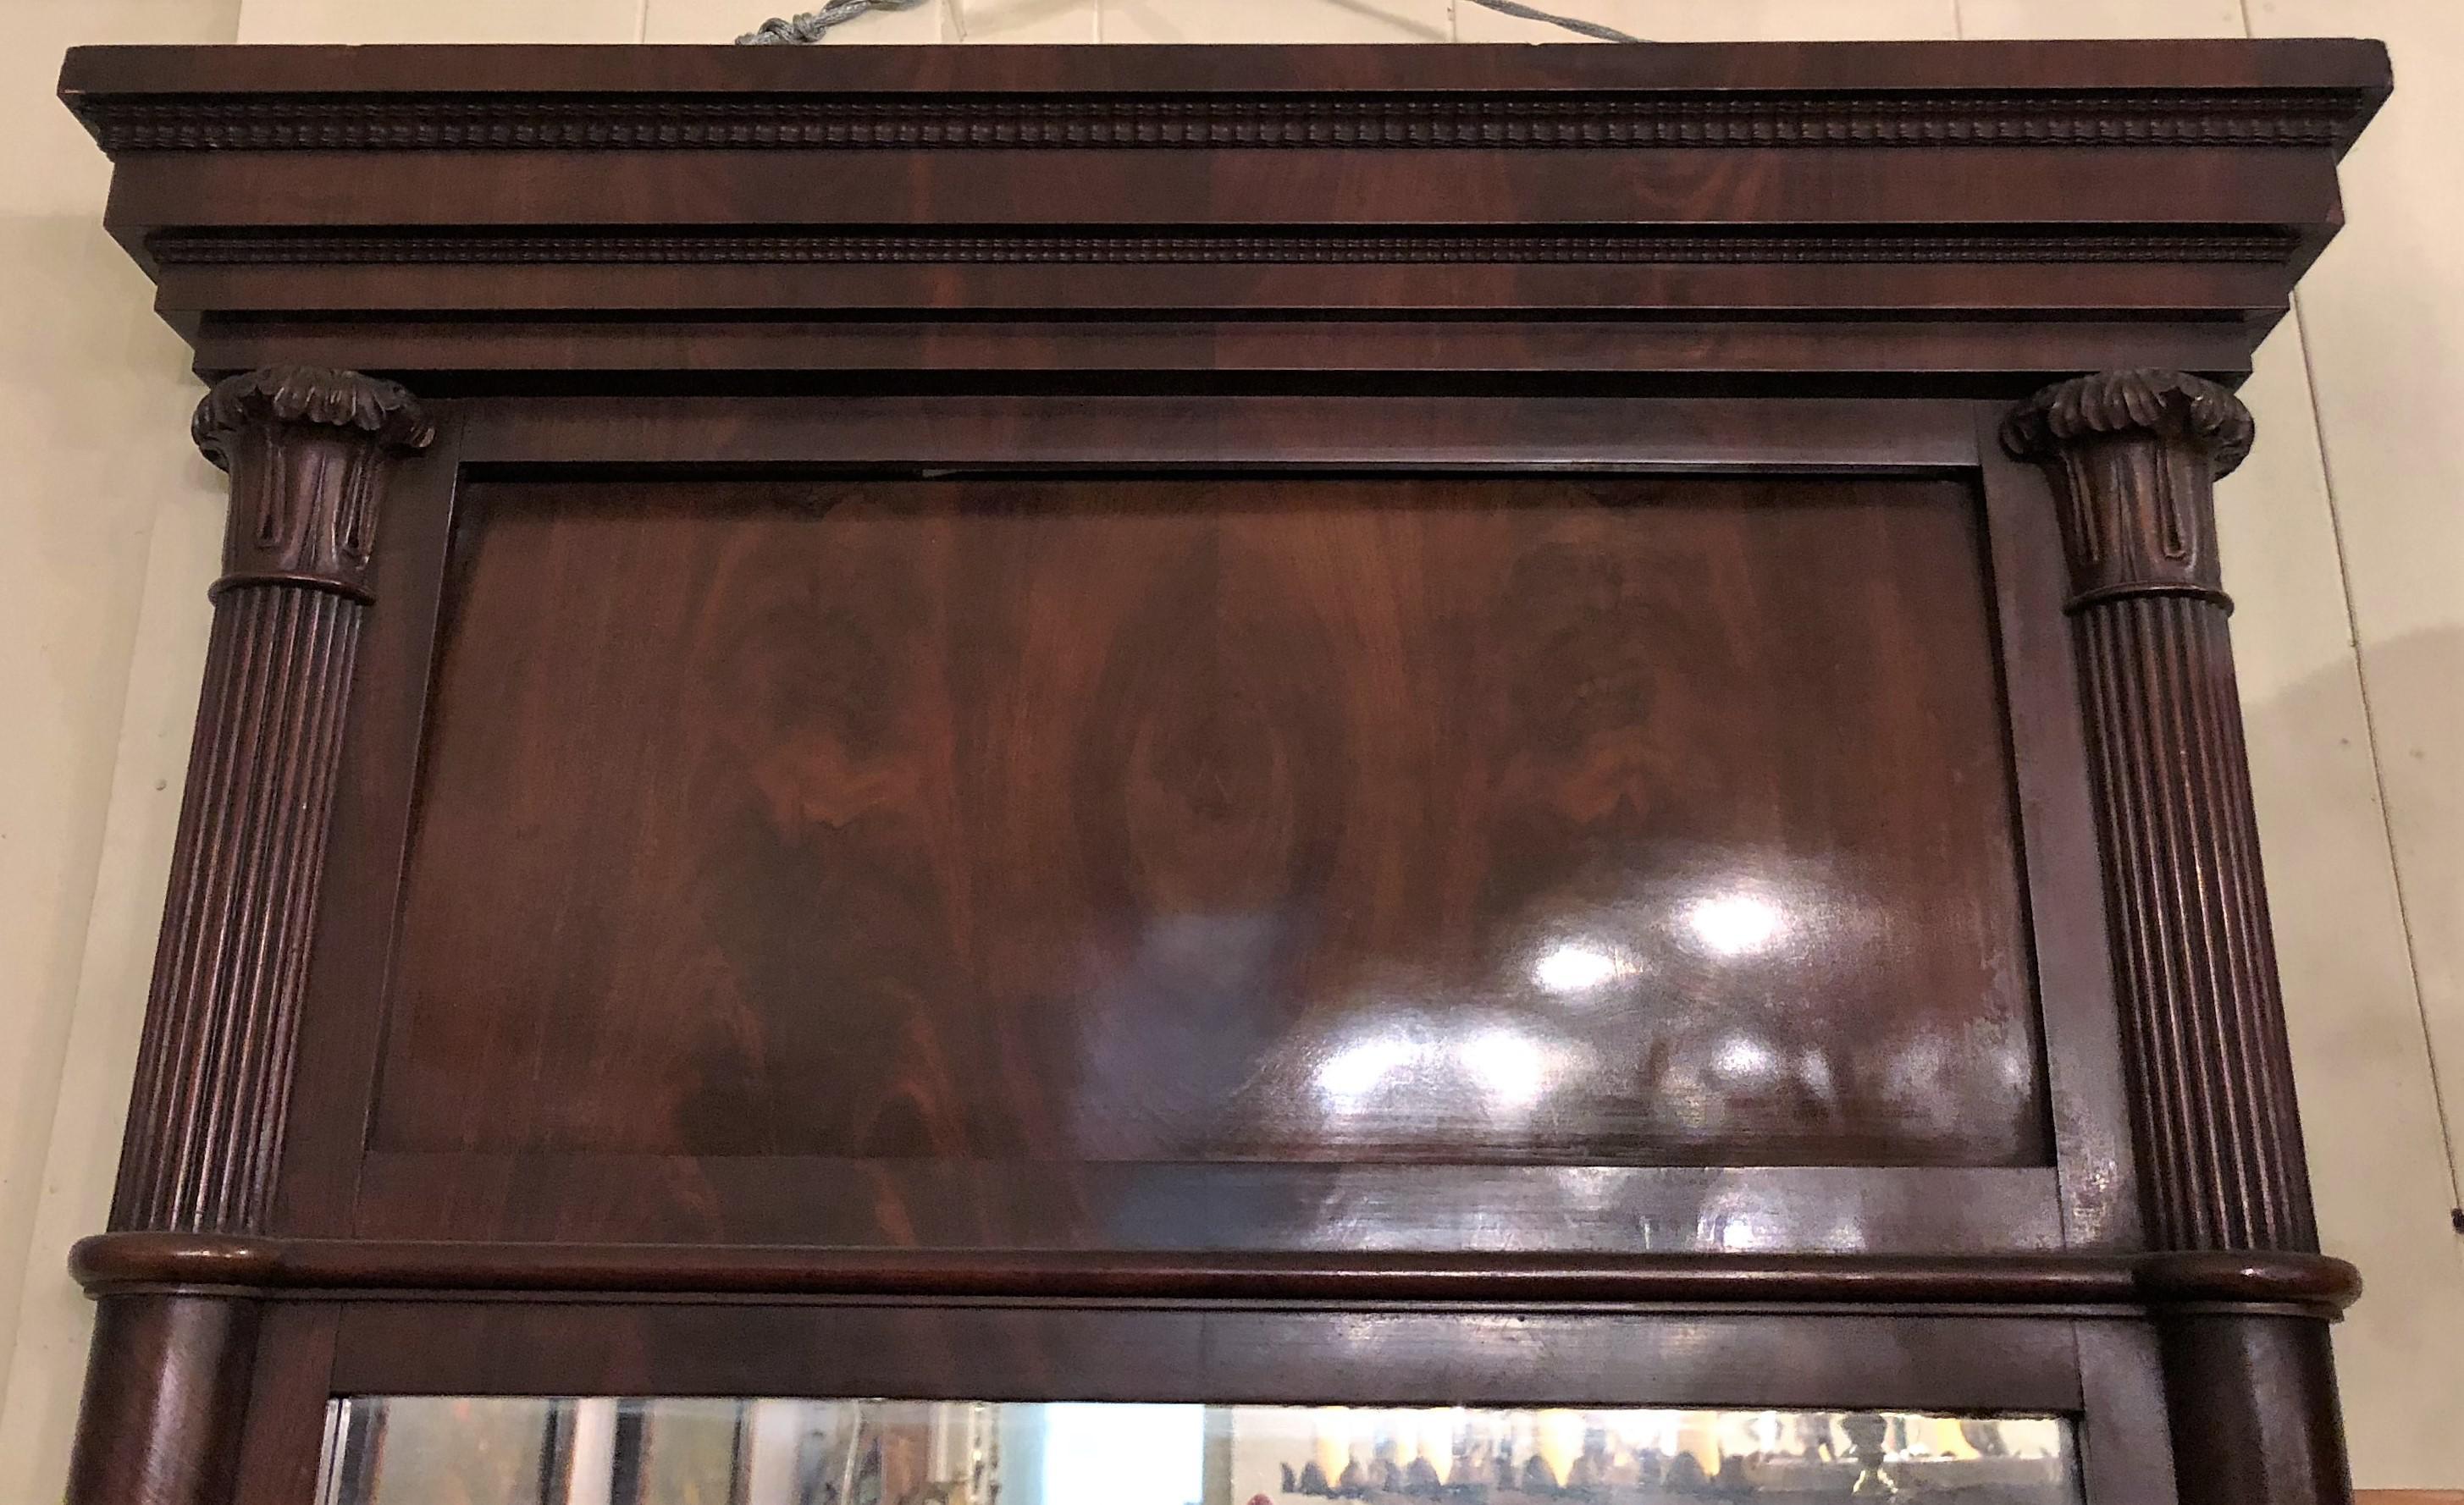 A straightforward mid-19th century American mirror. At 5 feet in height, it could work over a mantel, in an entryway or on a wall between two other pieces of furniture. For fanciers of straight lines, this is a good option.
 